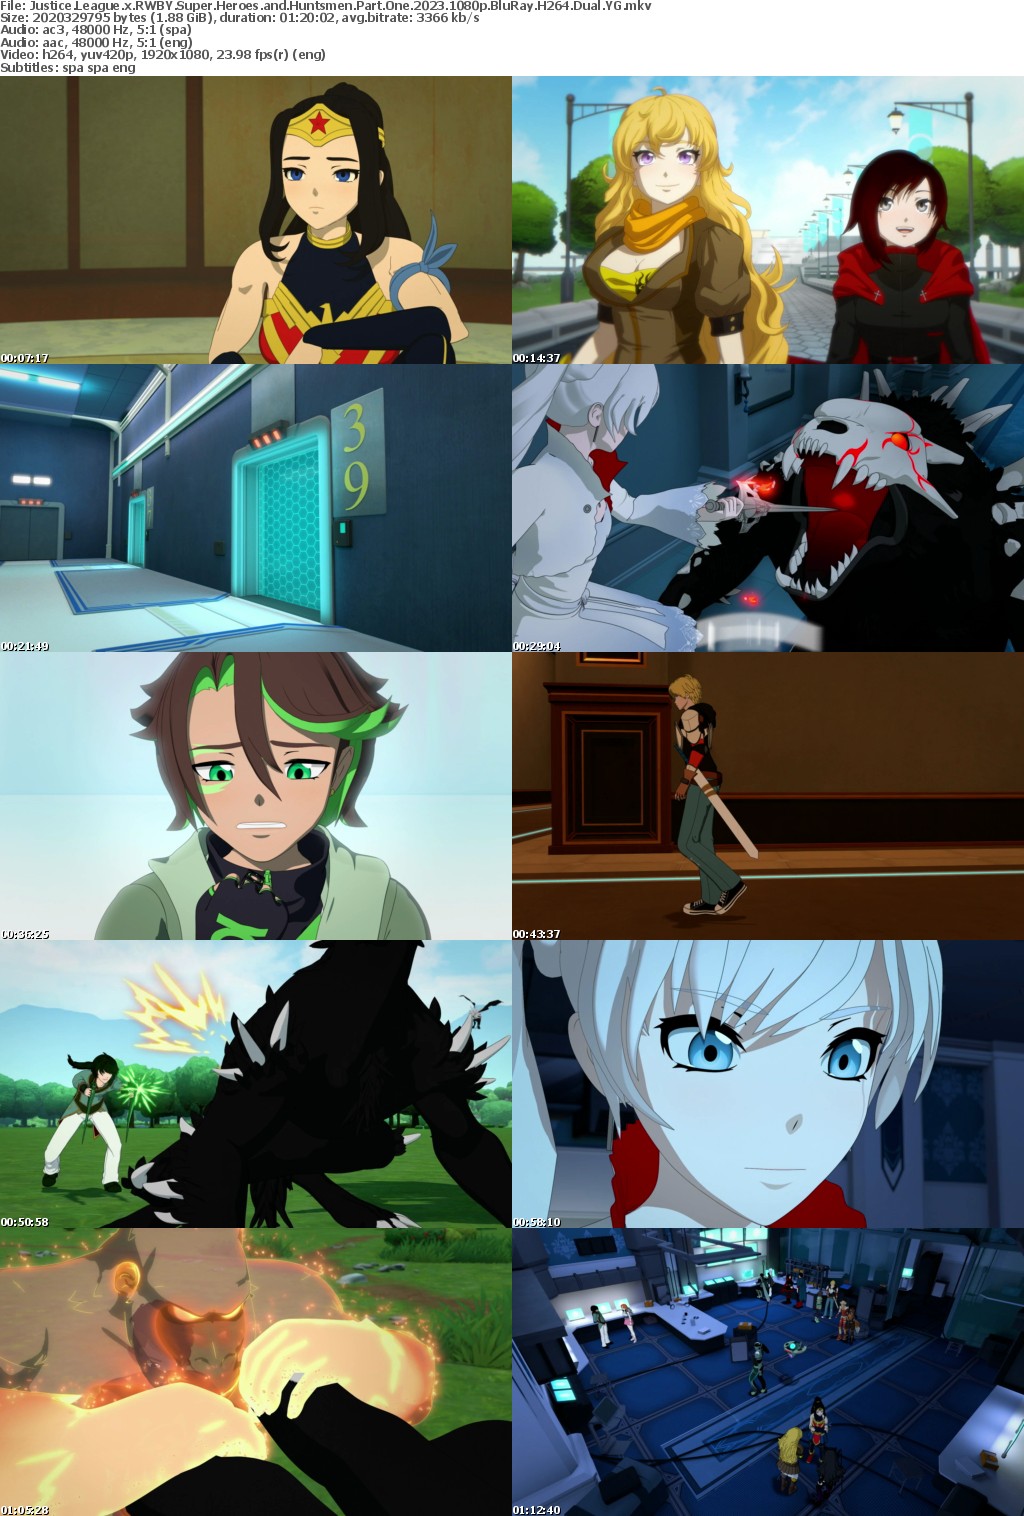 Justice League x RWBY Super Heroes and Huntsmen Part One 2023 YG